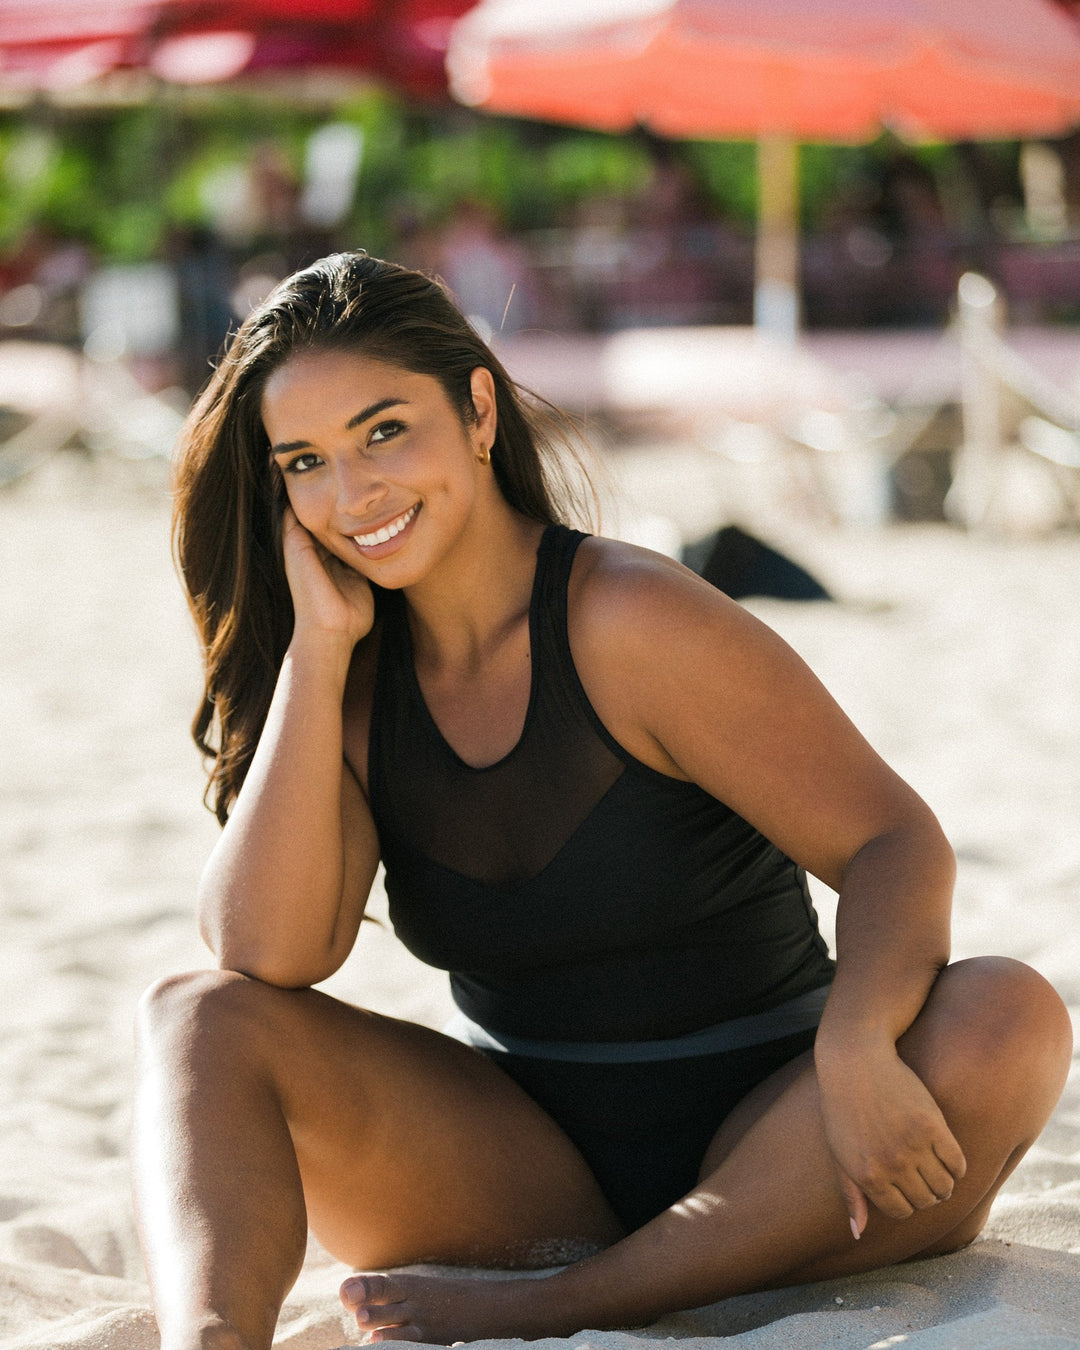 A women sitting at the beach wearing an athletic black swimsuit top with mesh detailing.